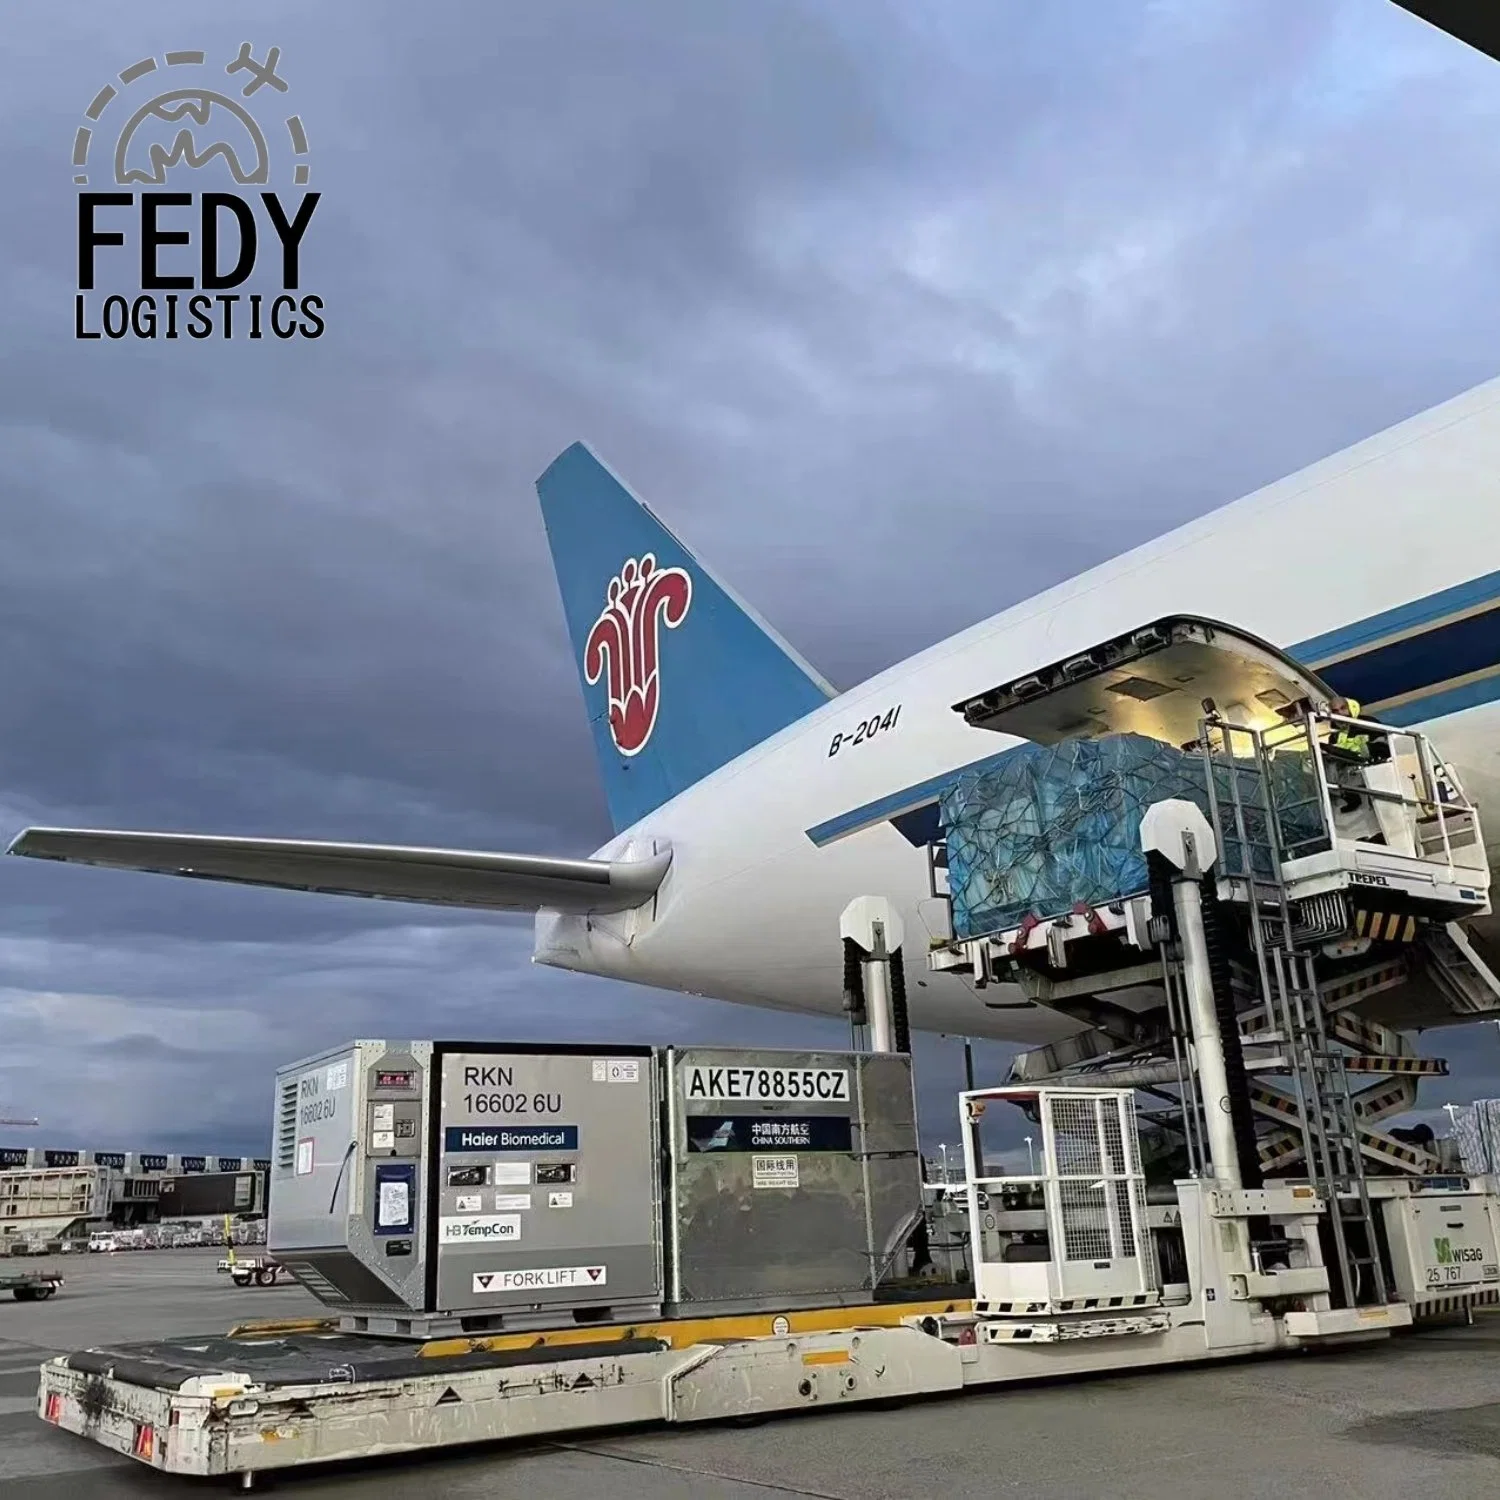 High Quality Best Forwarder Air Freight Shipping Agents to France/UK/Germany/Us Fba Amazon From Shenzhen DDP Sea Shipping Container Cargo Ocean Rate Transport